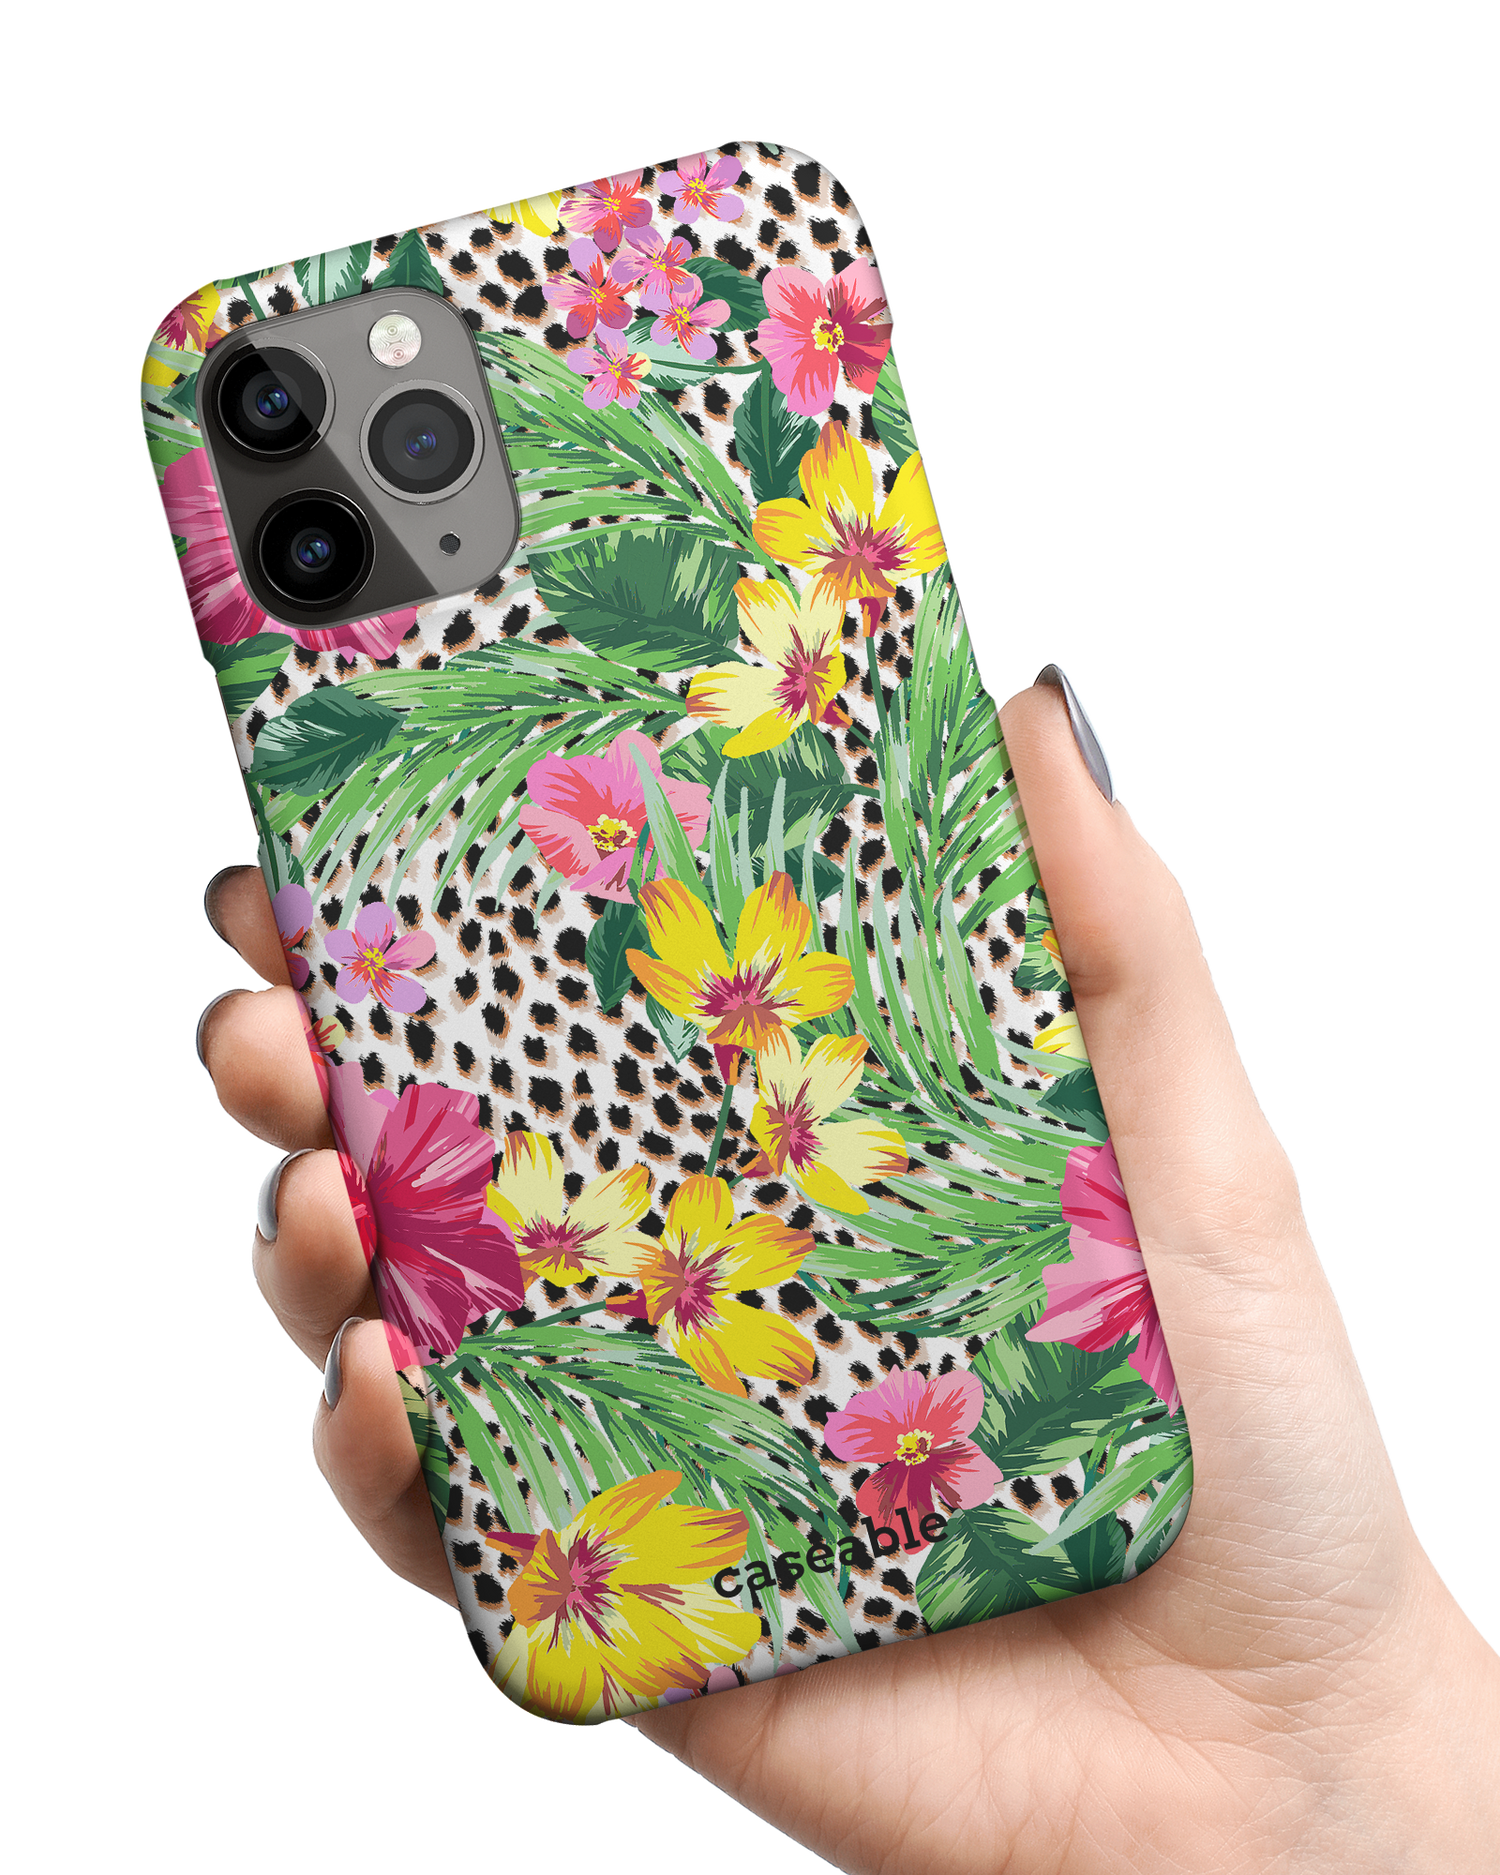 Tropical Cheetah Hard Shell Phone Case Apple iPhone 11 Pro Max held in hand